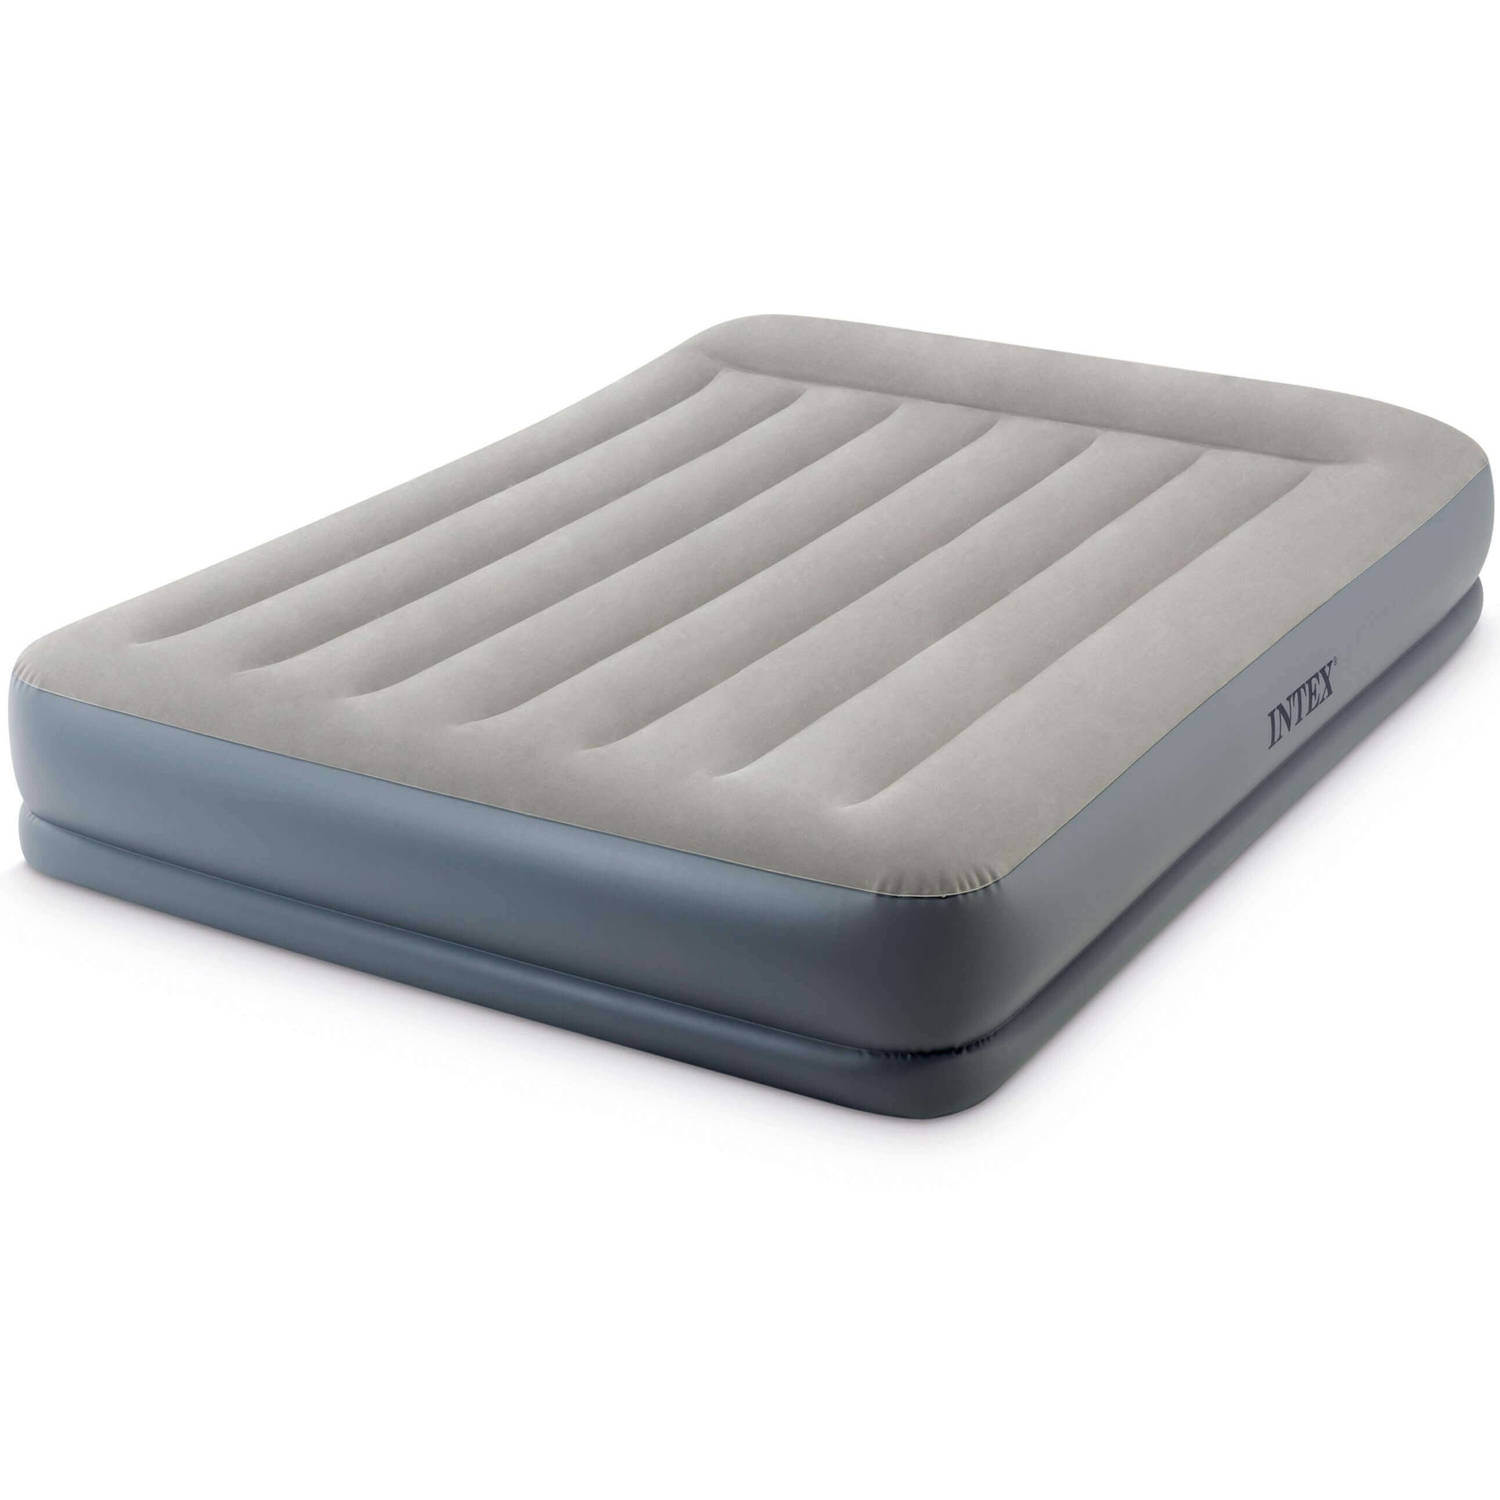 Intex Pillow Rest Mid-Rise luchtbed tweepersoons